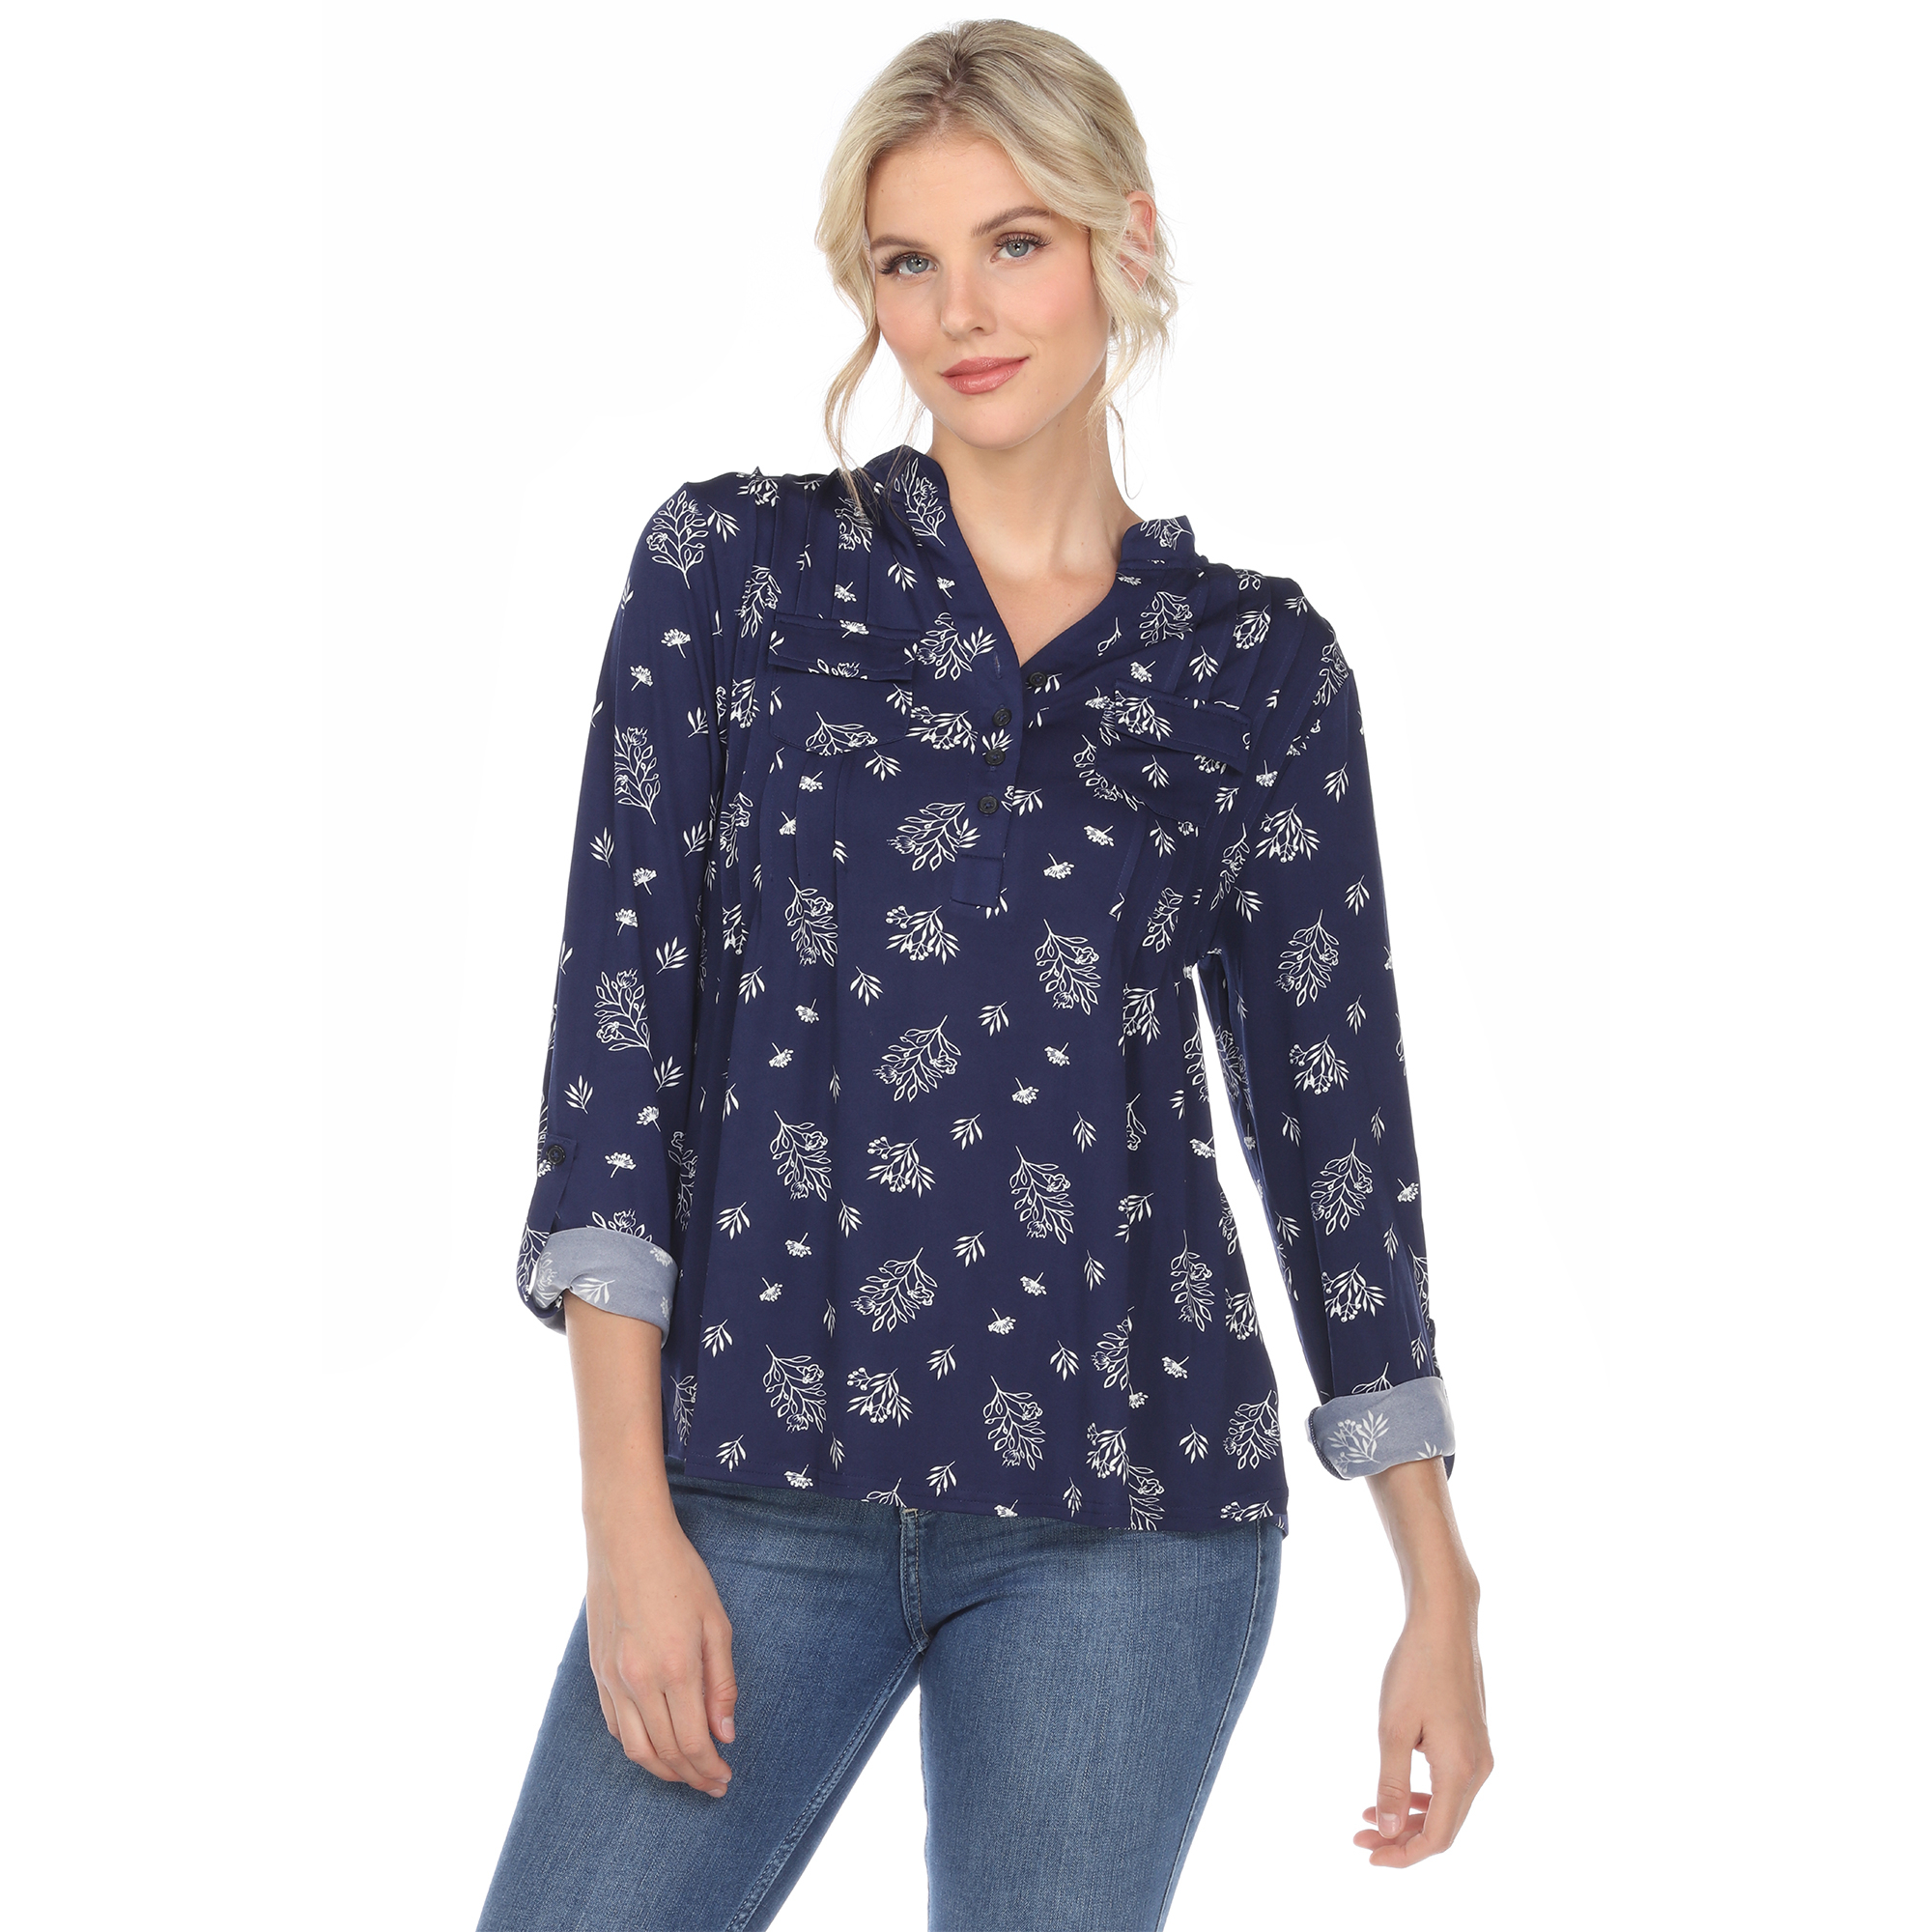 White Mark Women's Pleated Long Sleeve Leaf Print Blouse - Navy, Small